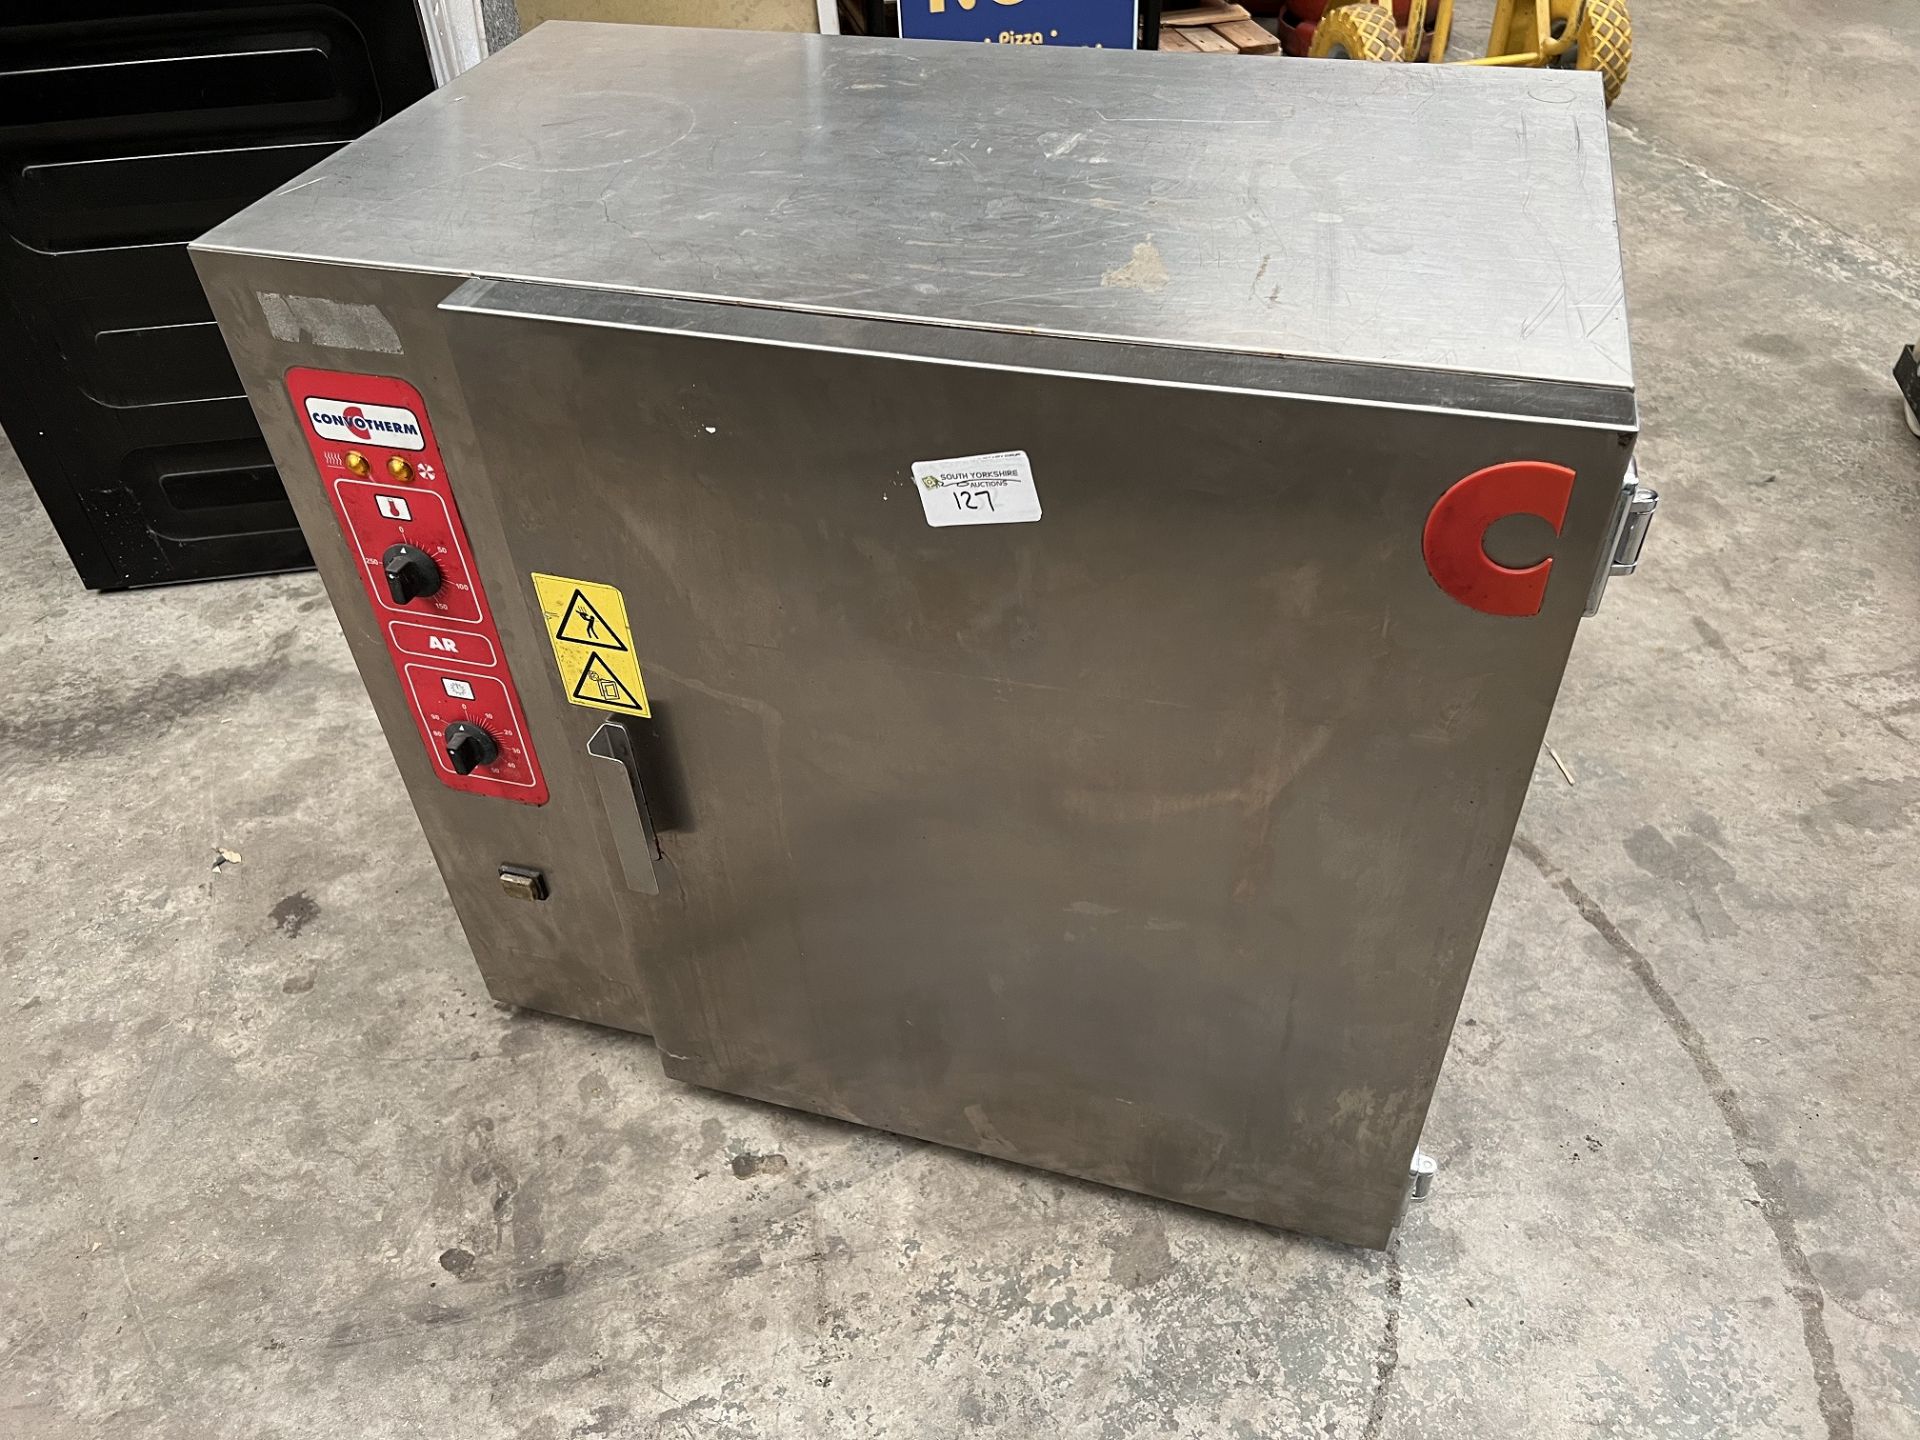 Convotherm Convection Oven